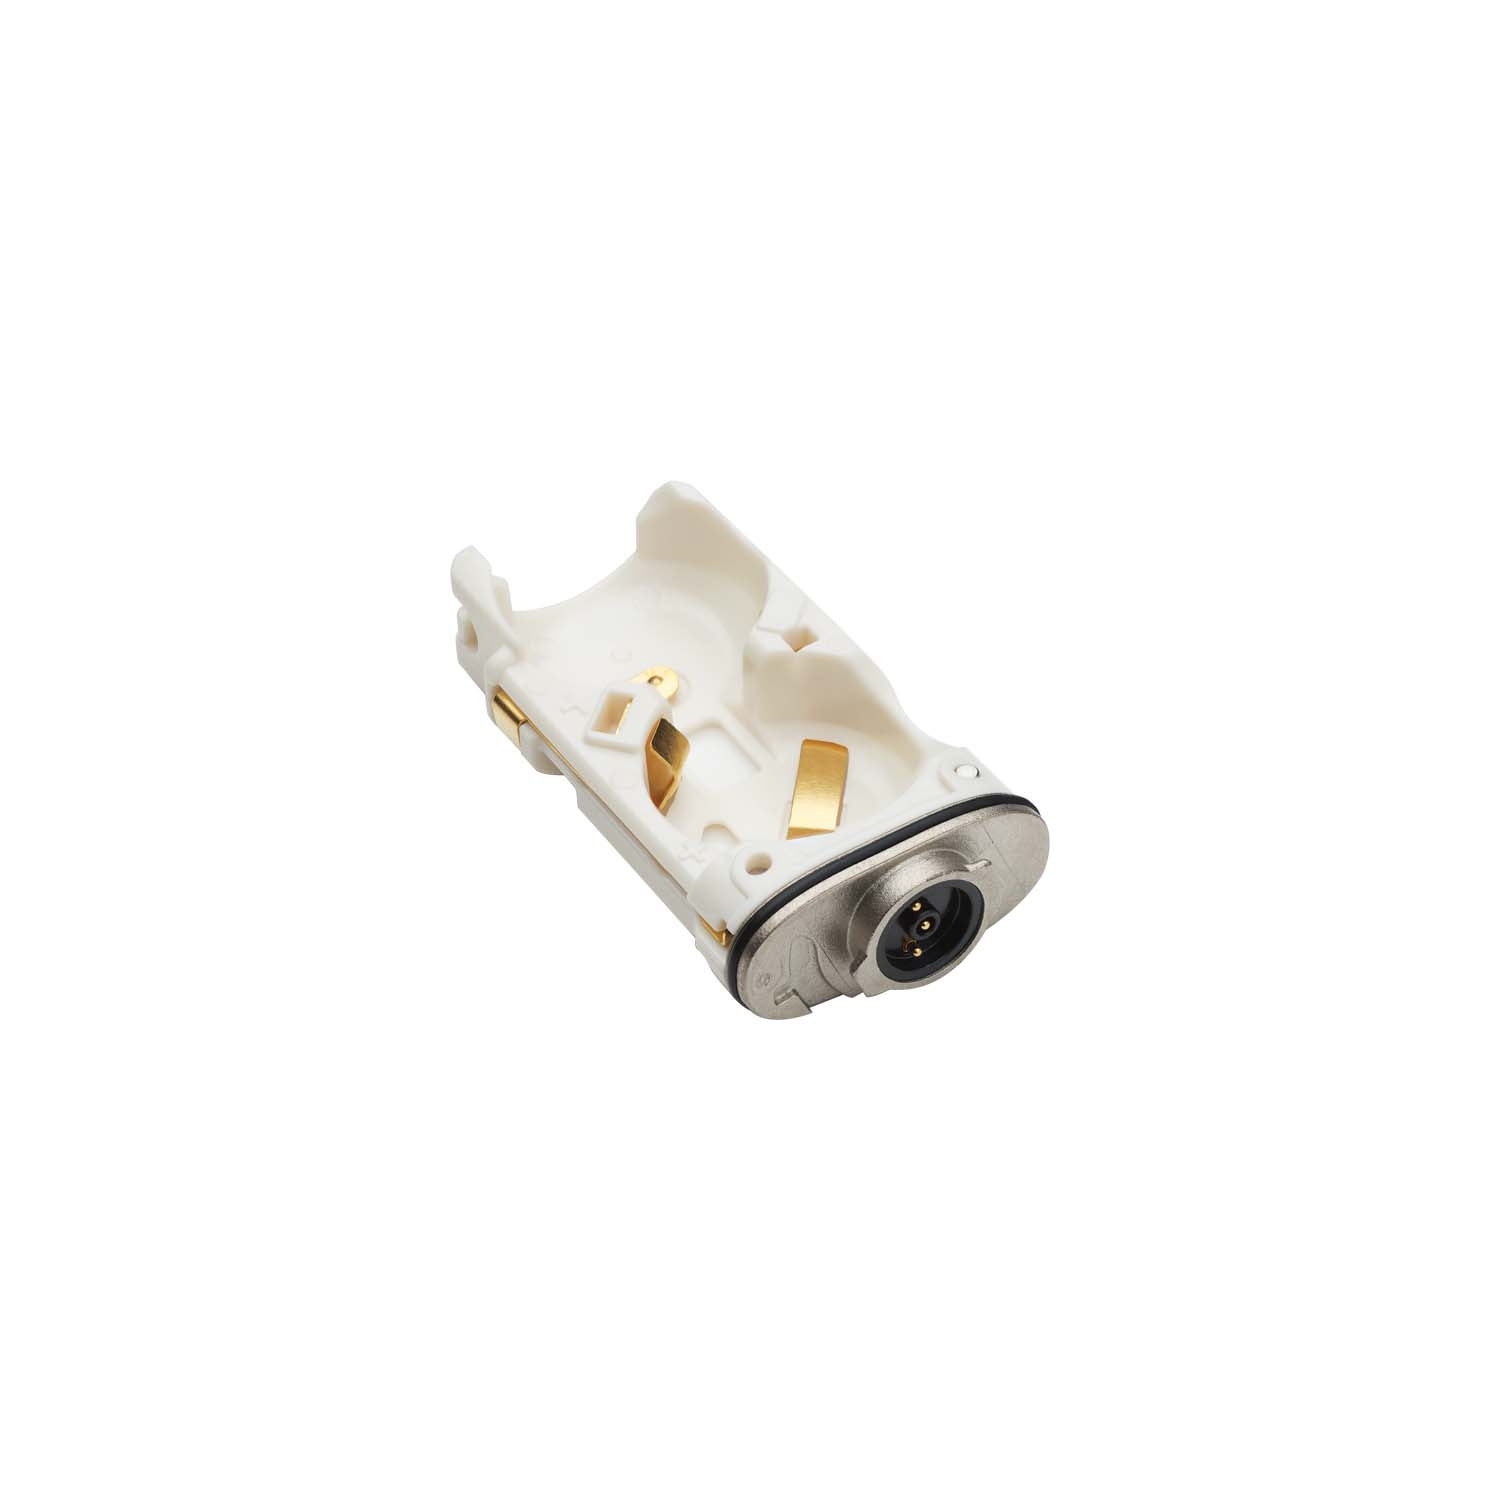 Shop Cochlear Battery Holder | Cochlear Store